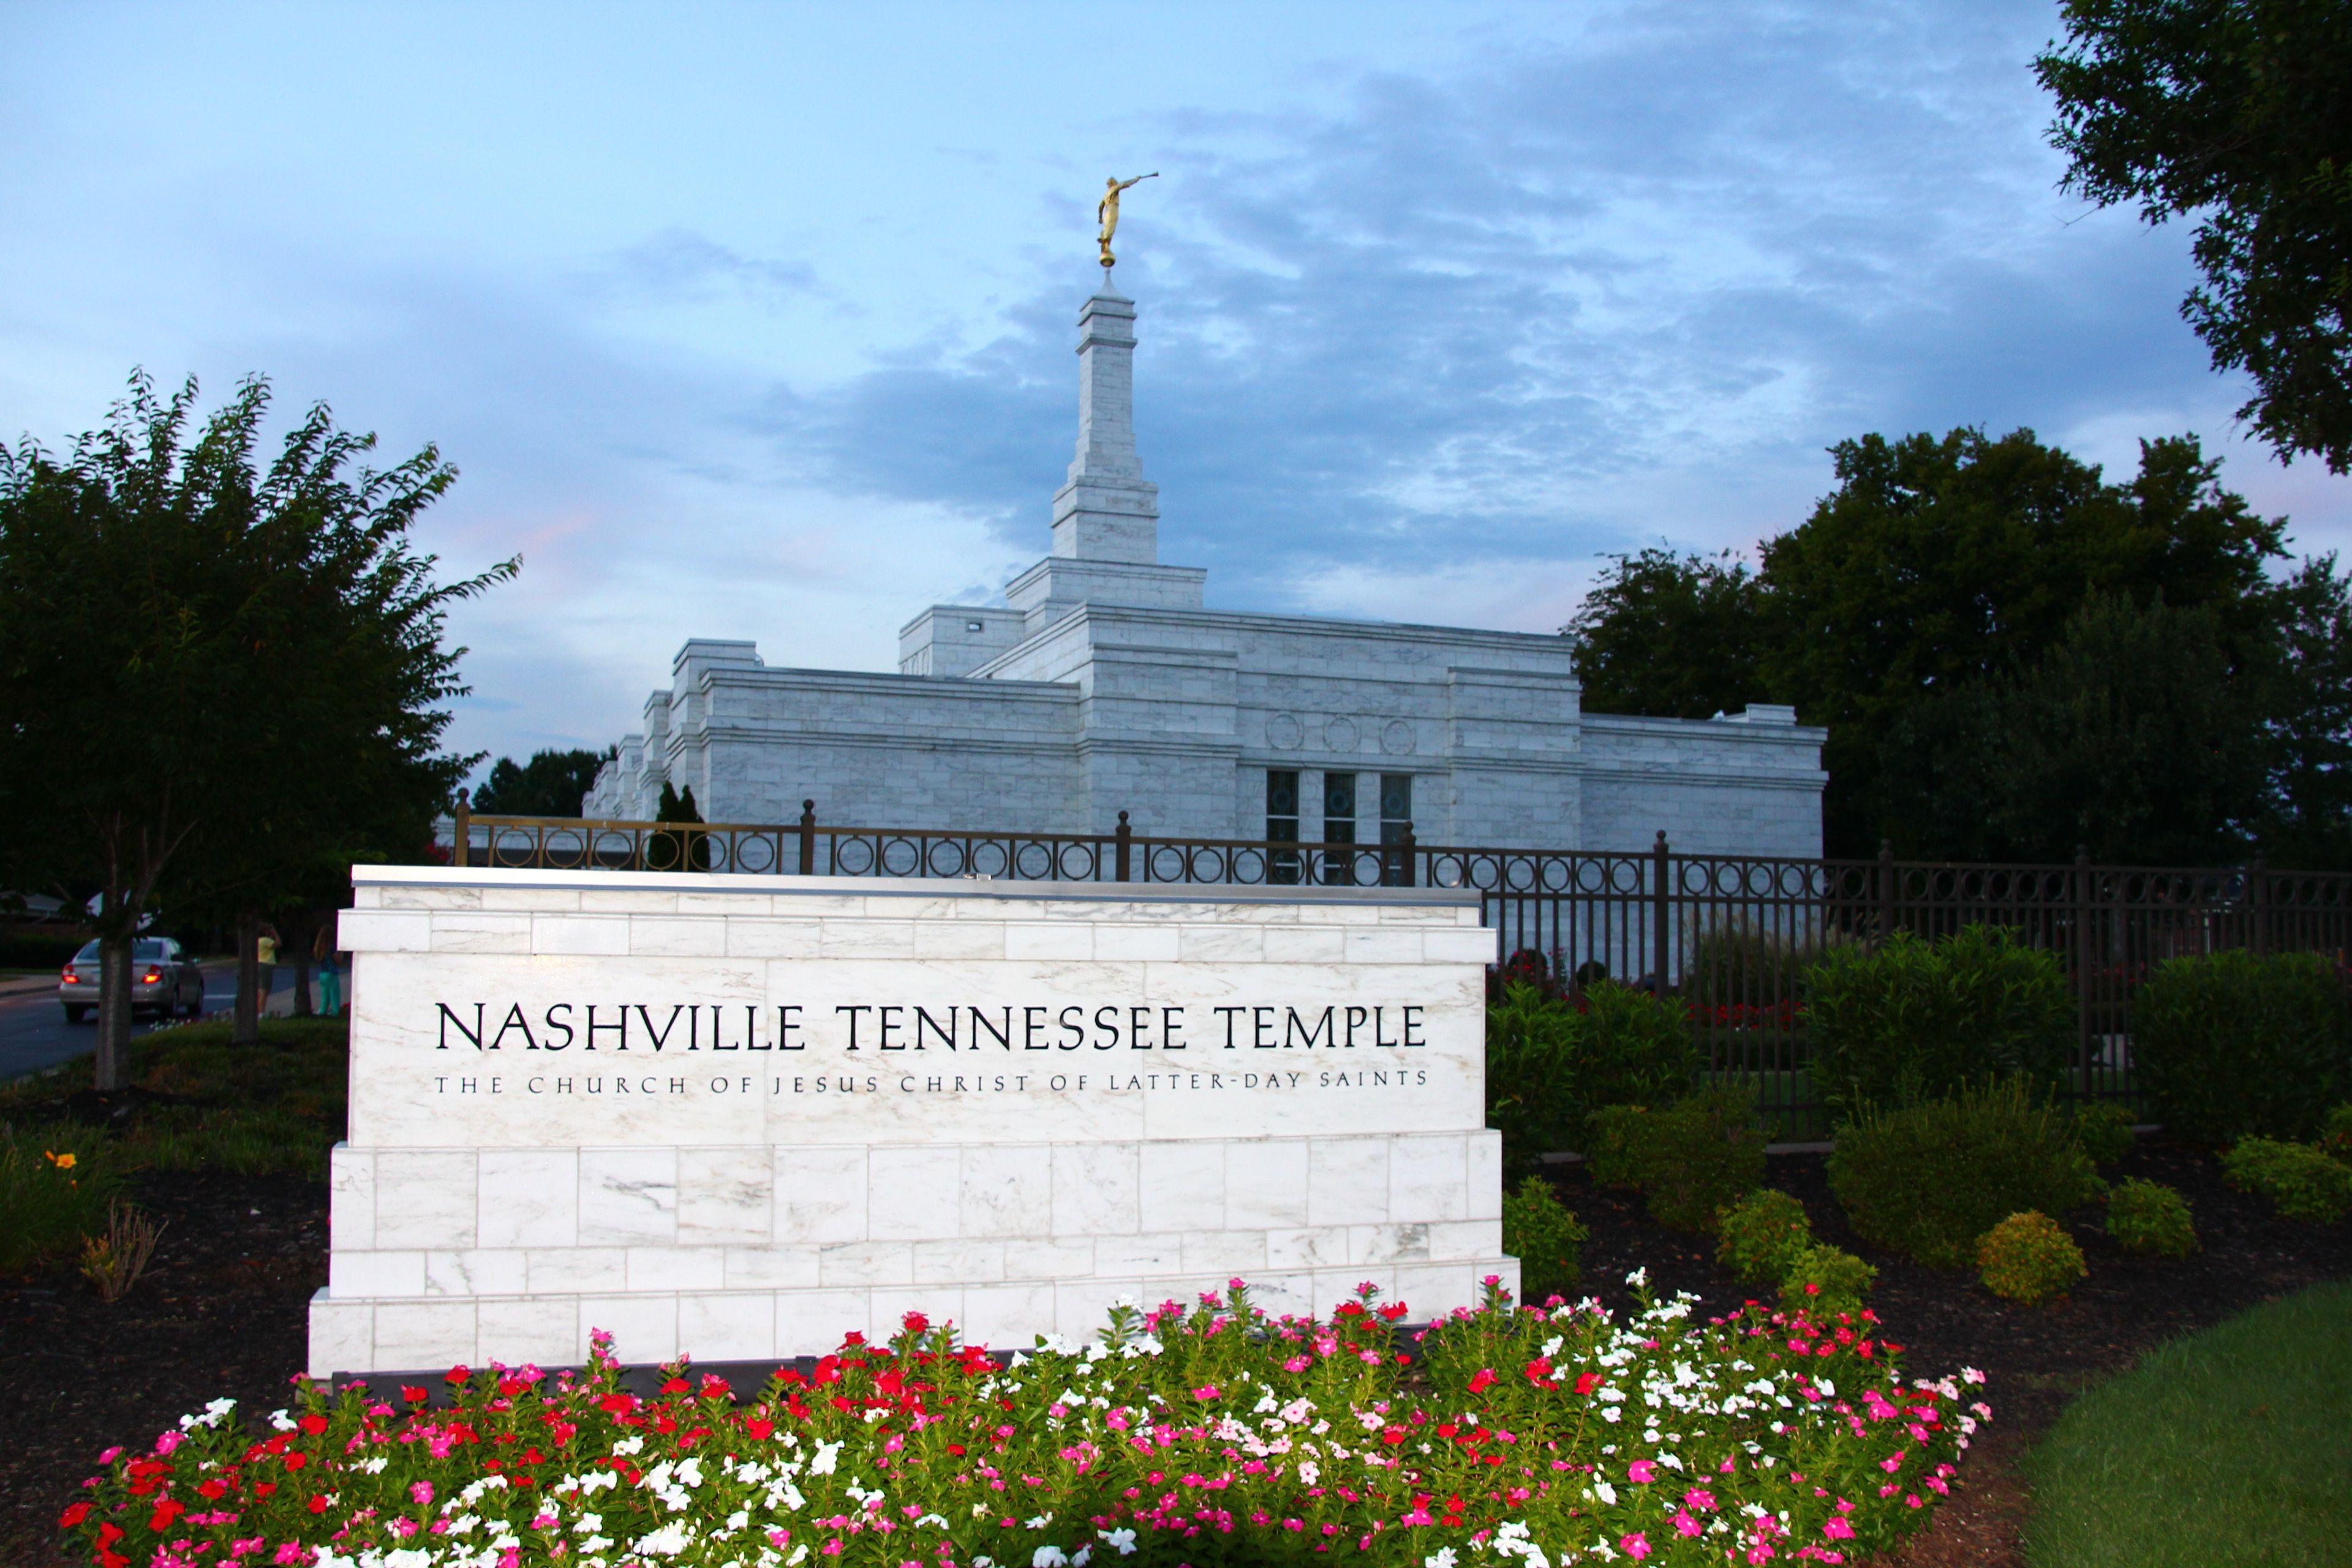 The Nashville Tennessee Temple name sign, including scenery and the exterior of the temple.